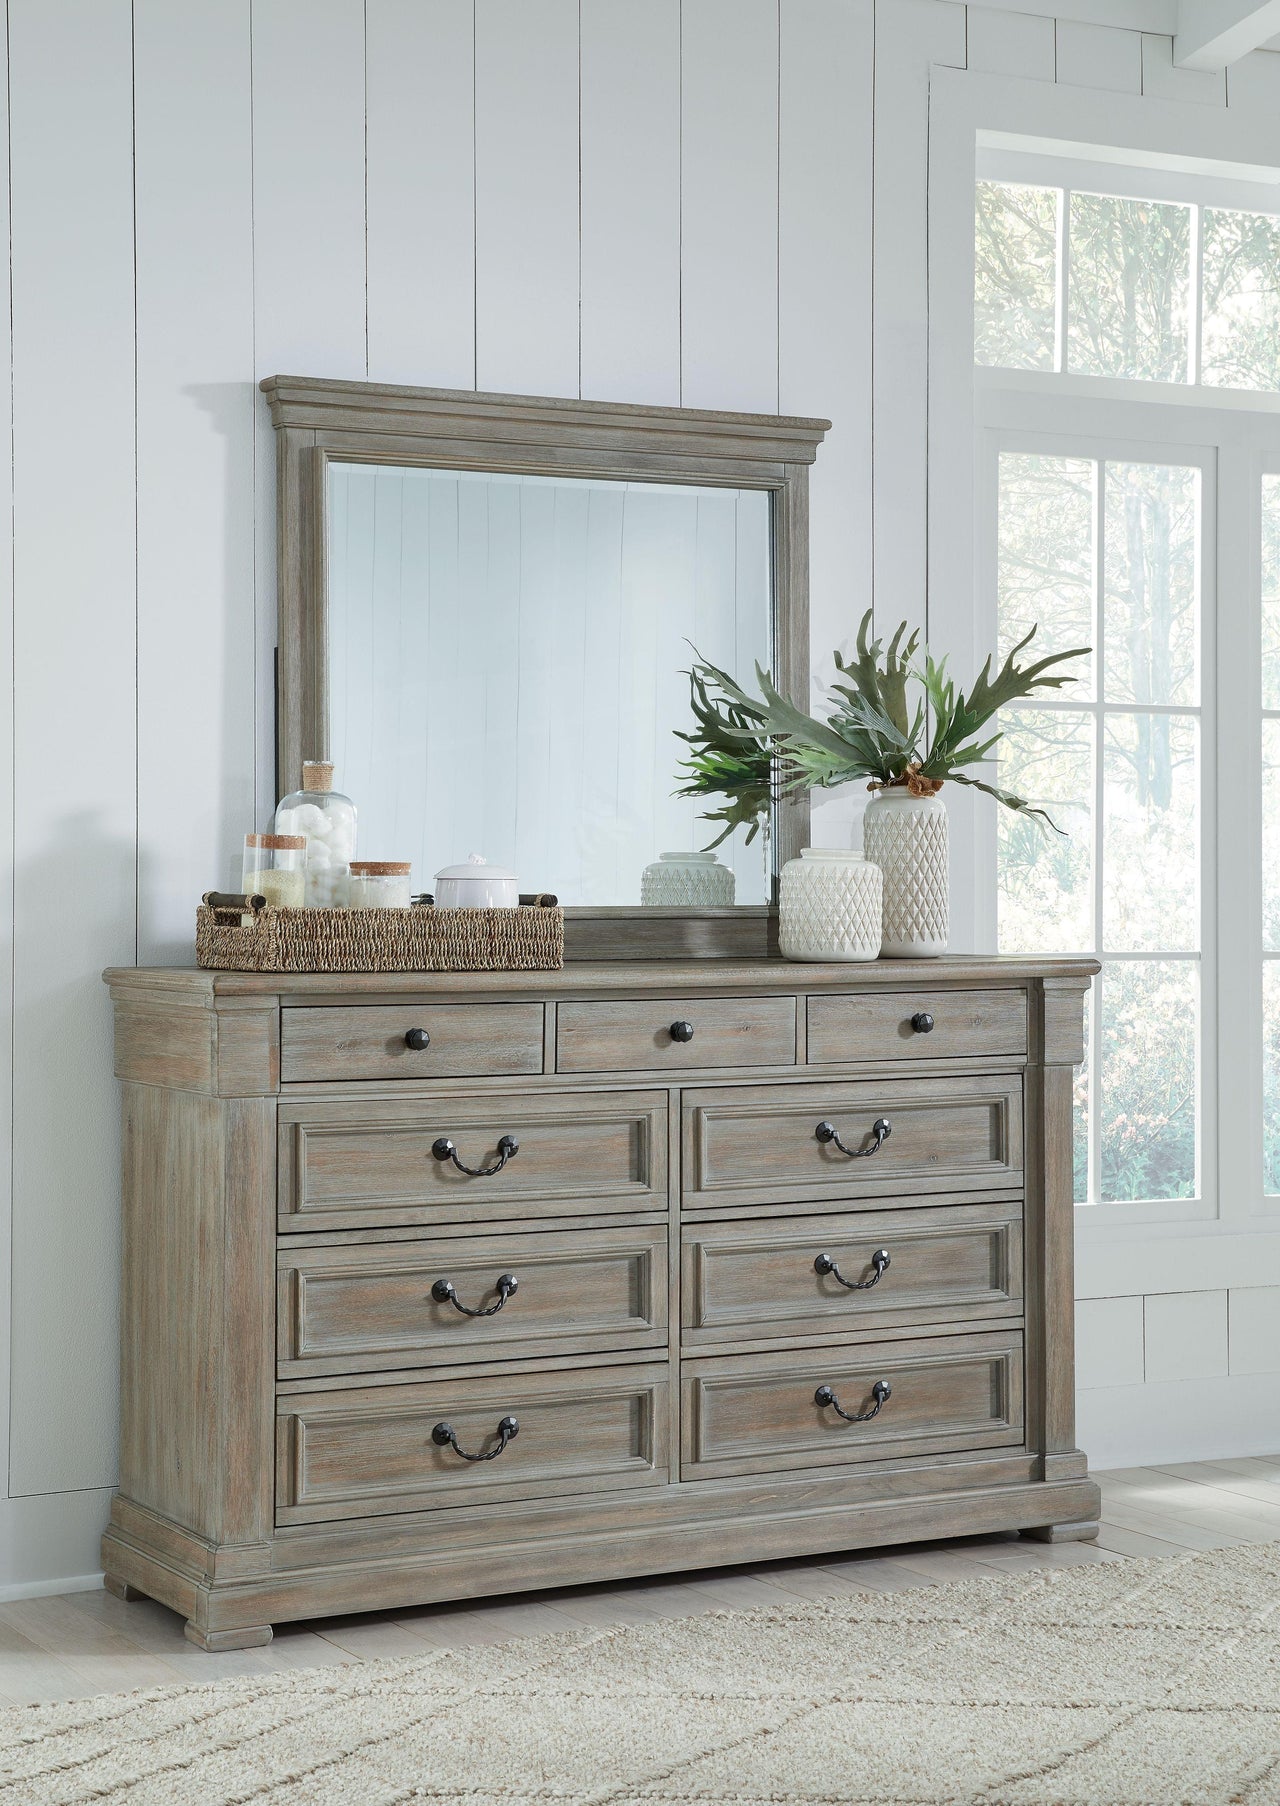 Moreshire - Bisque - Dresser, Mirror Tony's Home Furnishings Furniture. Beds. Dressers. Sofas.